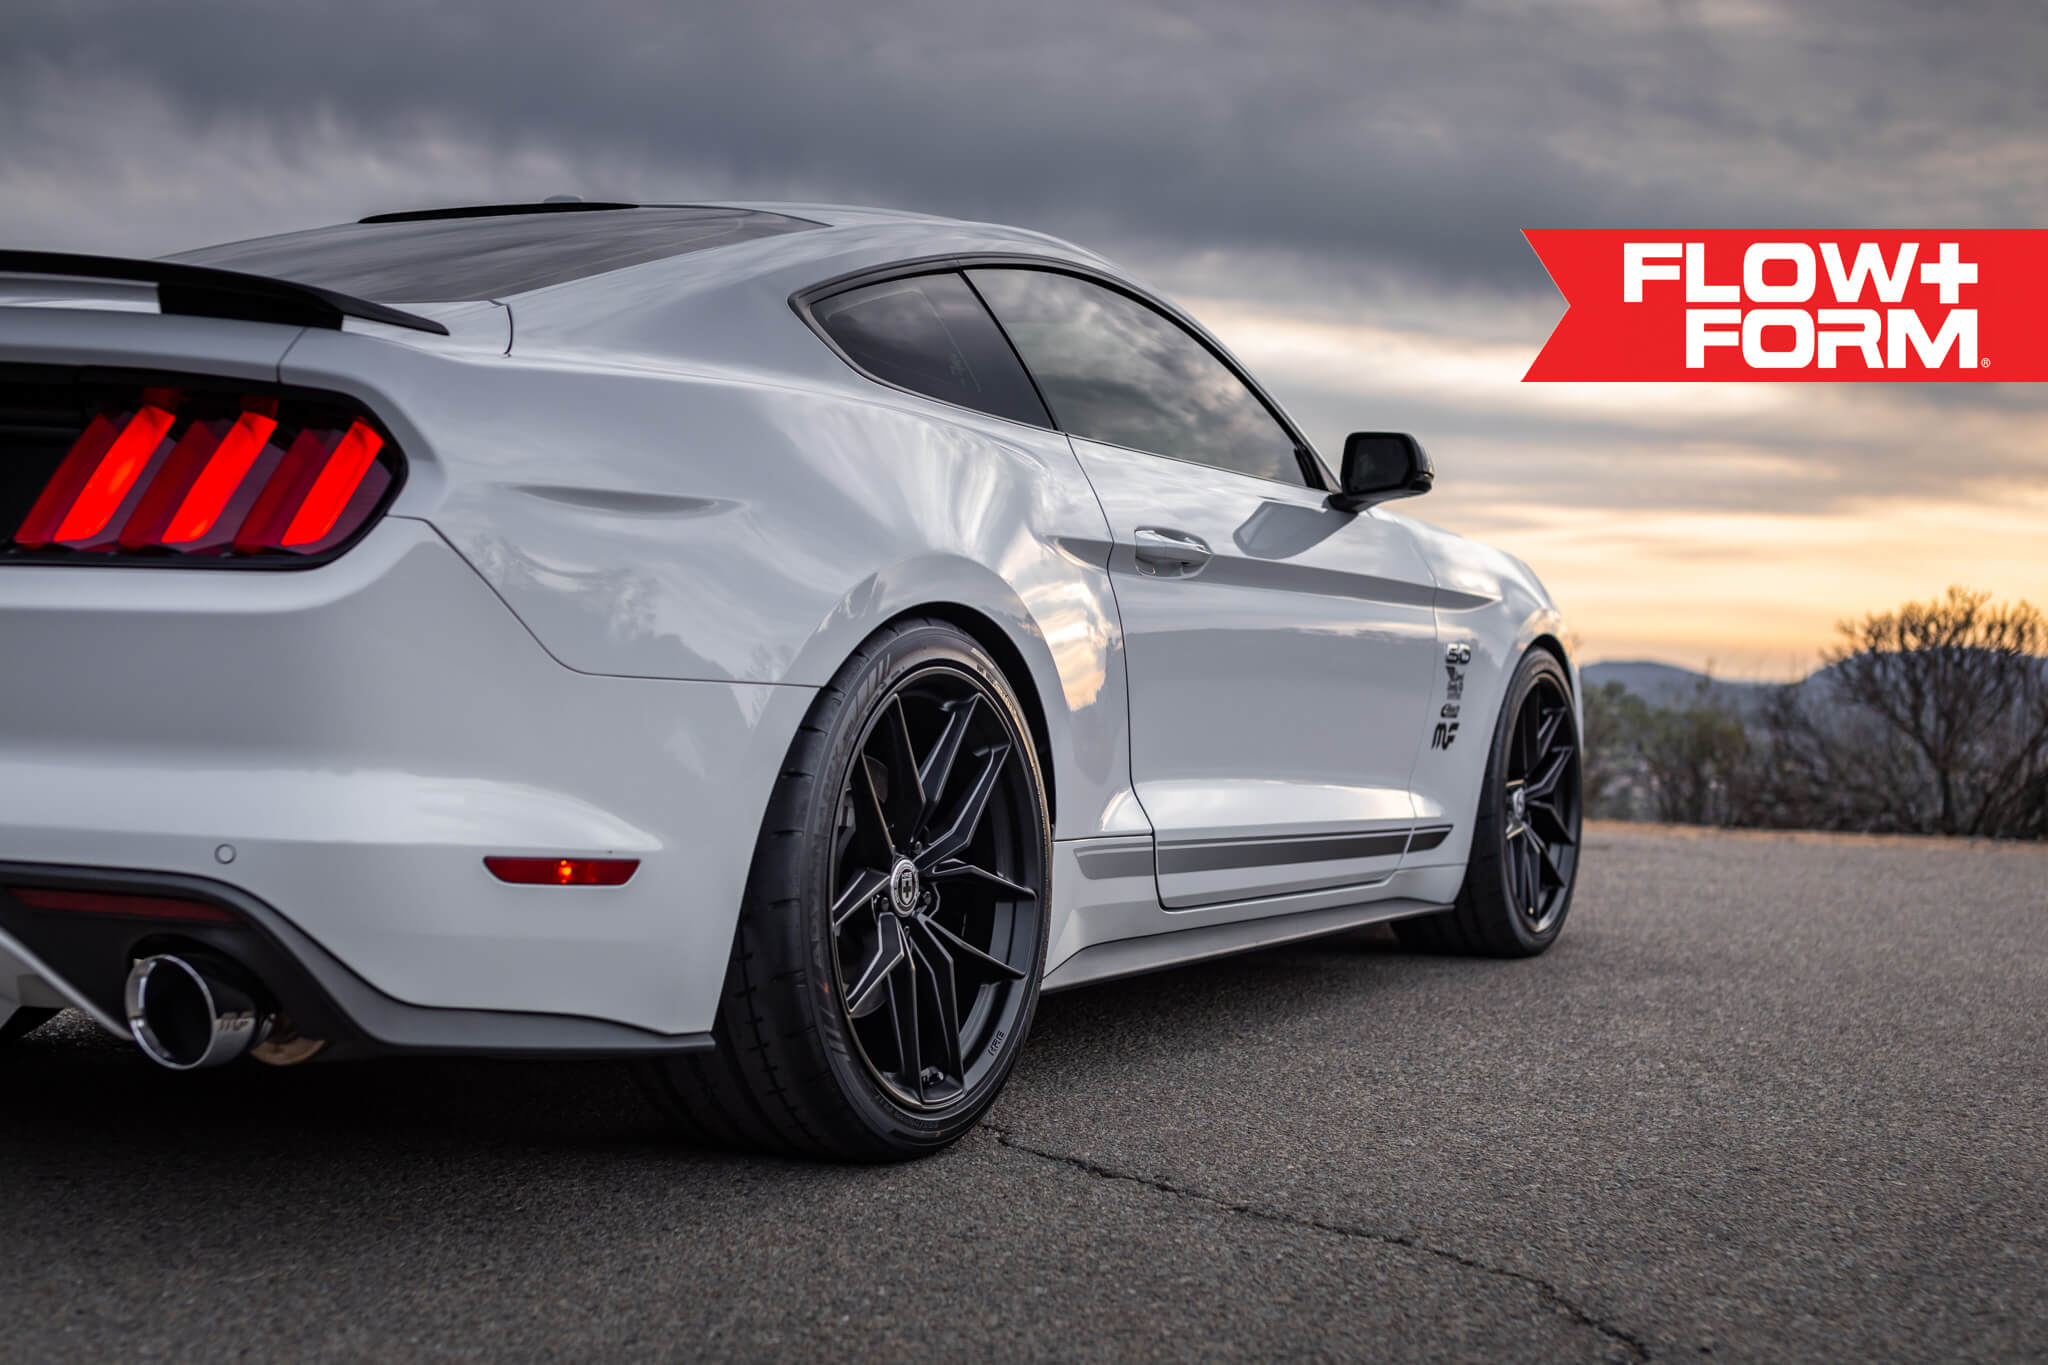 S650 Mustang UP TO $775 OFF on HRE Flow Form Wheels - HRE FF28 FF21 FF11 FF10 FF04 - Vibe Motorsports 6